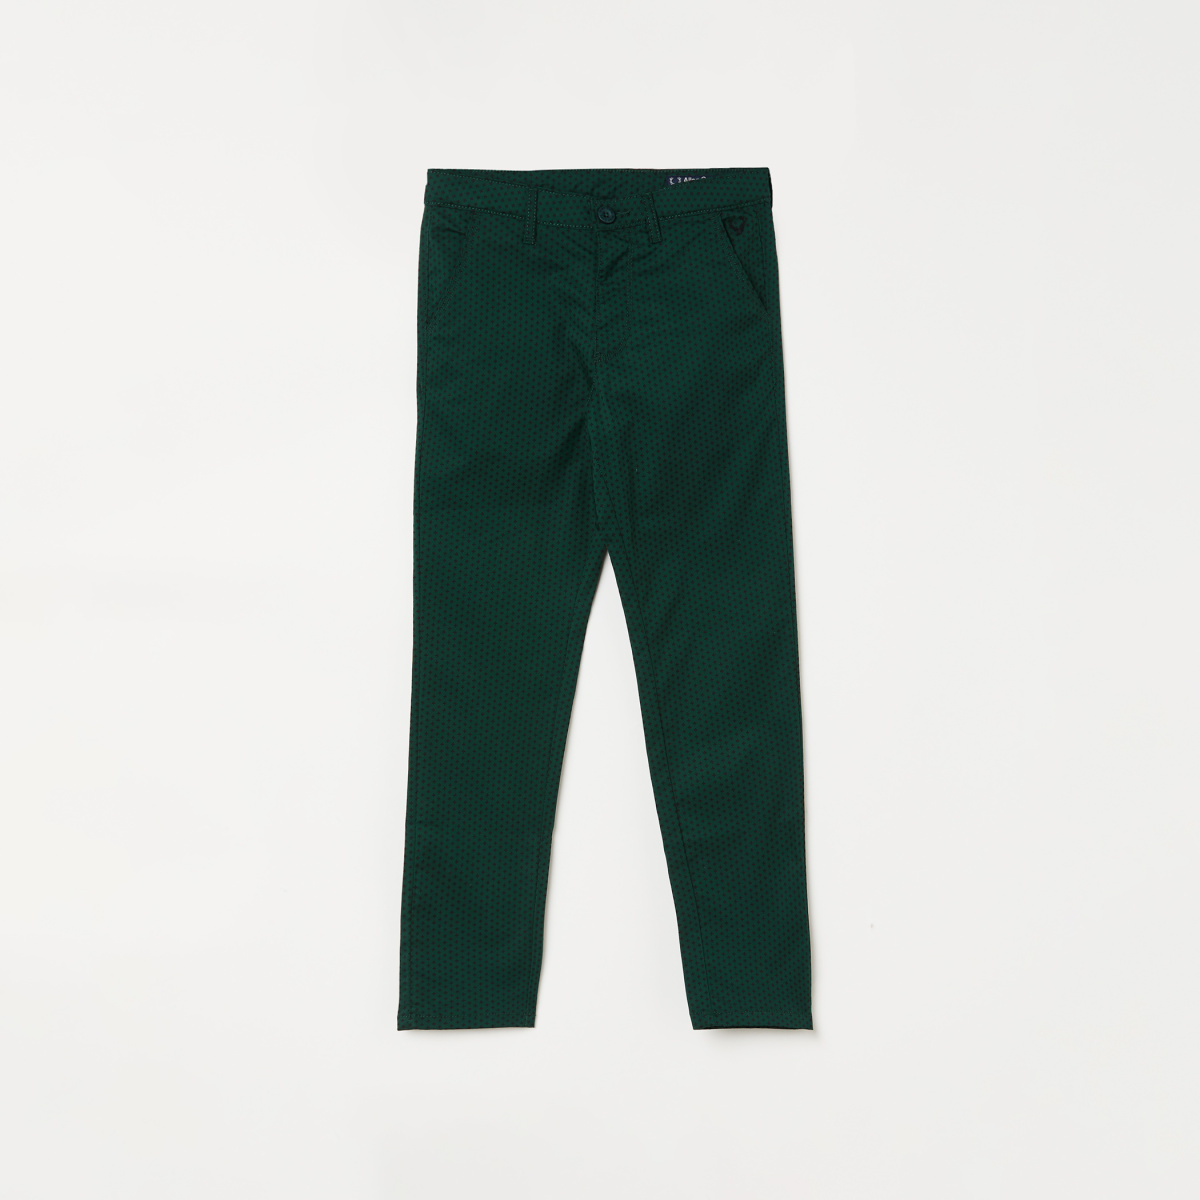 ALLEN SOLLY Boys Printed Trousers